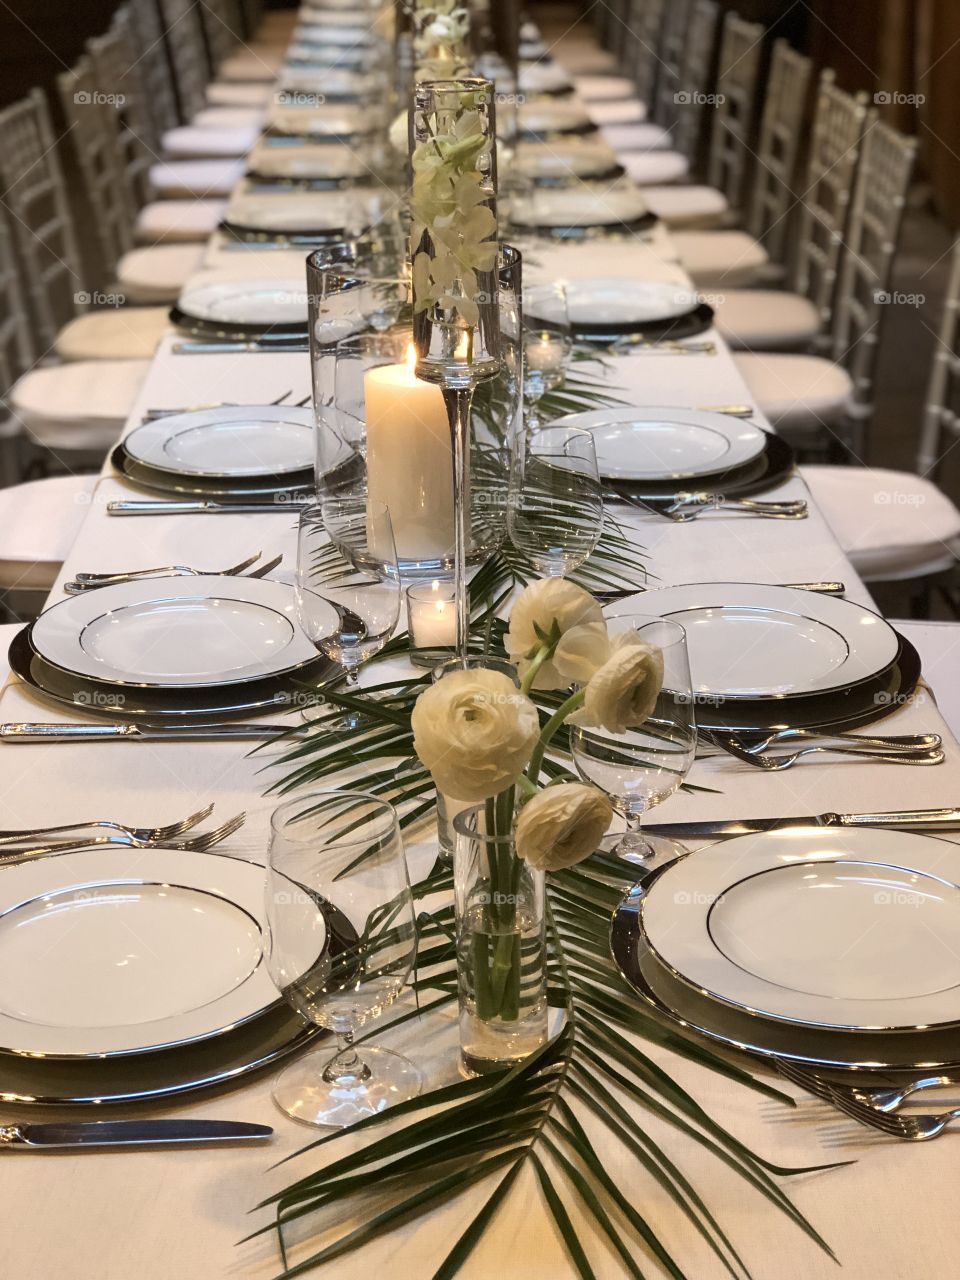 Christmas dinner tabslescape with palm tree leaves